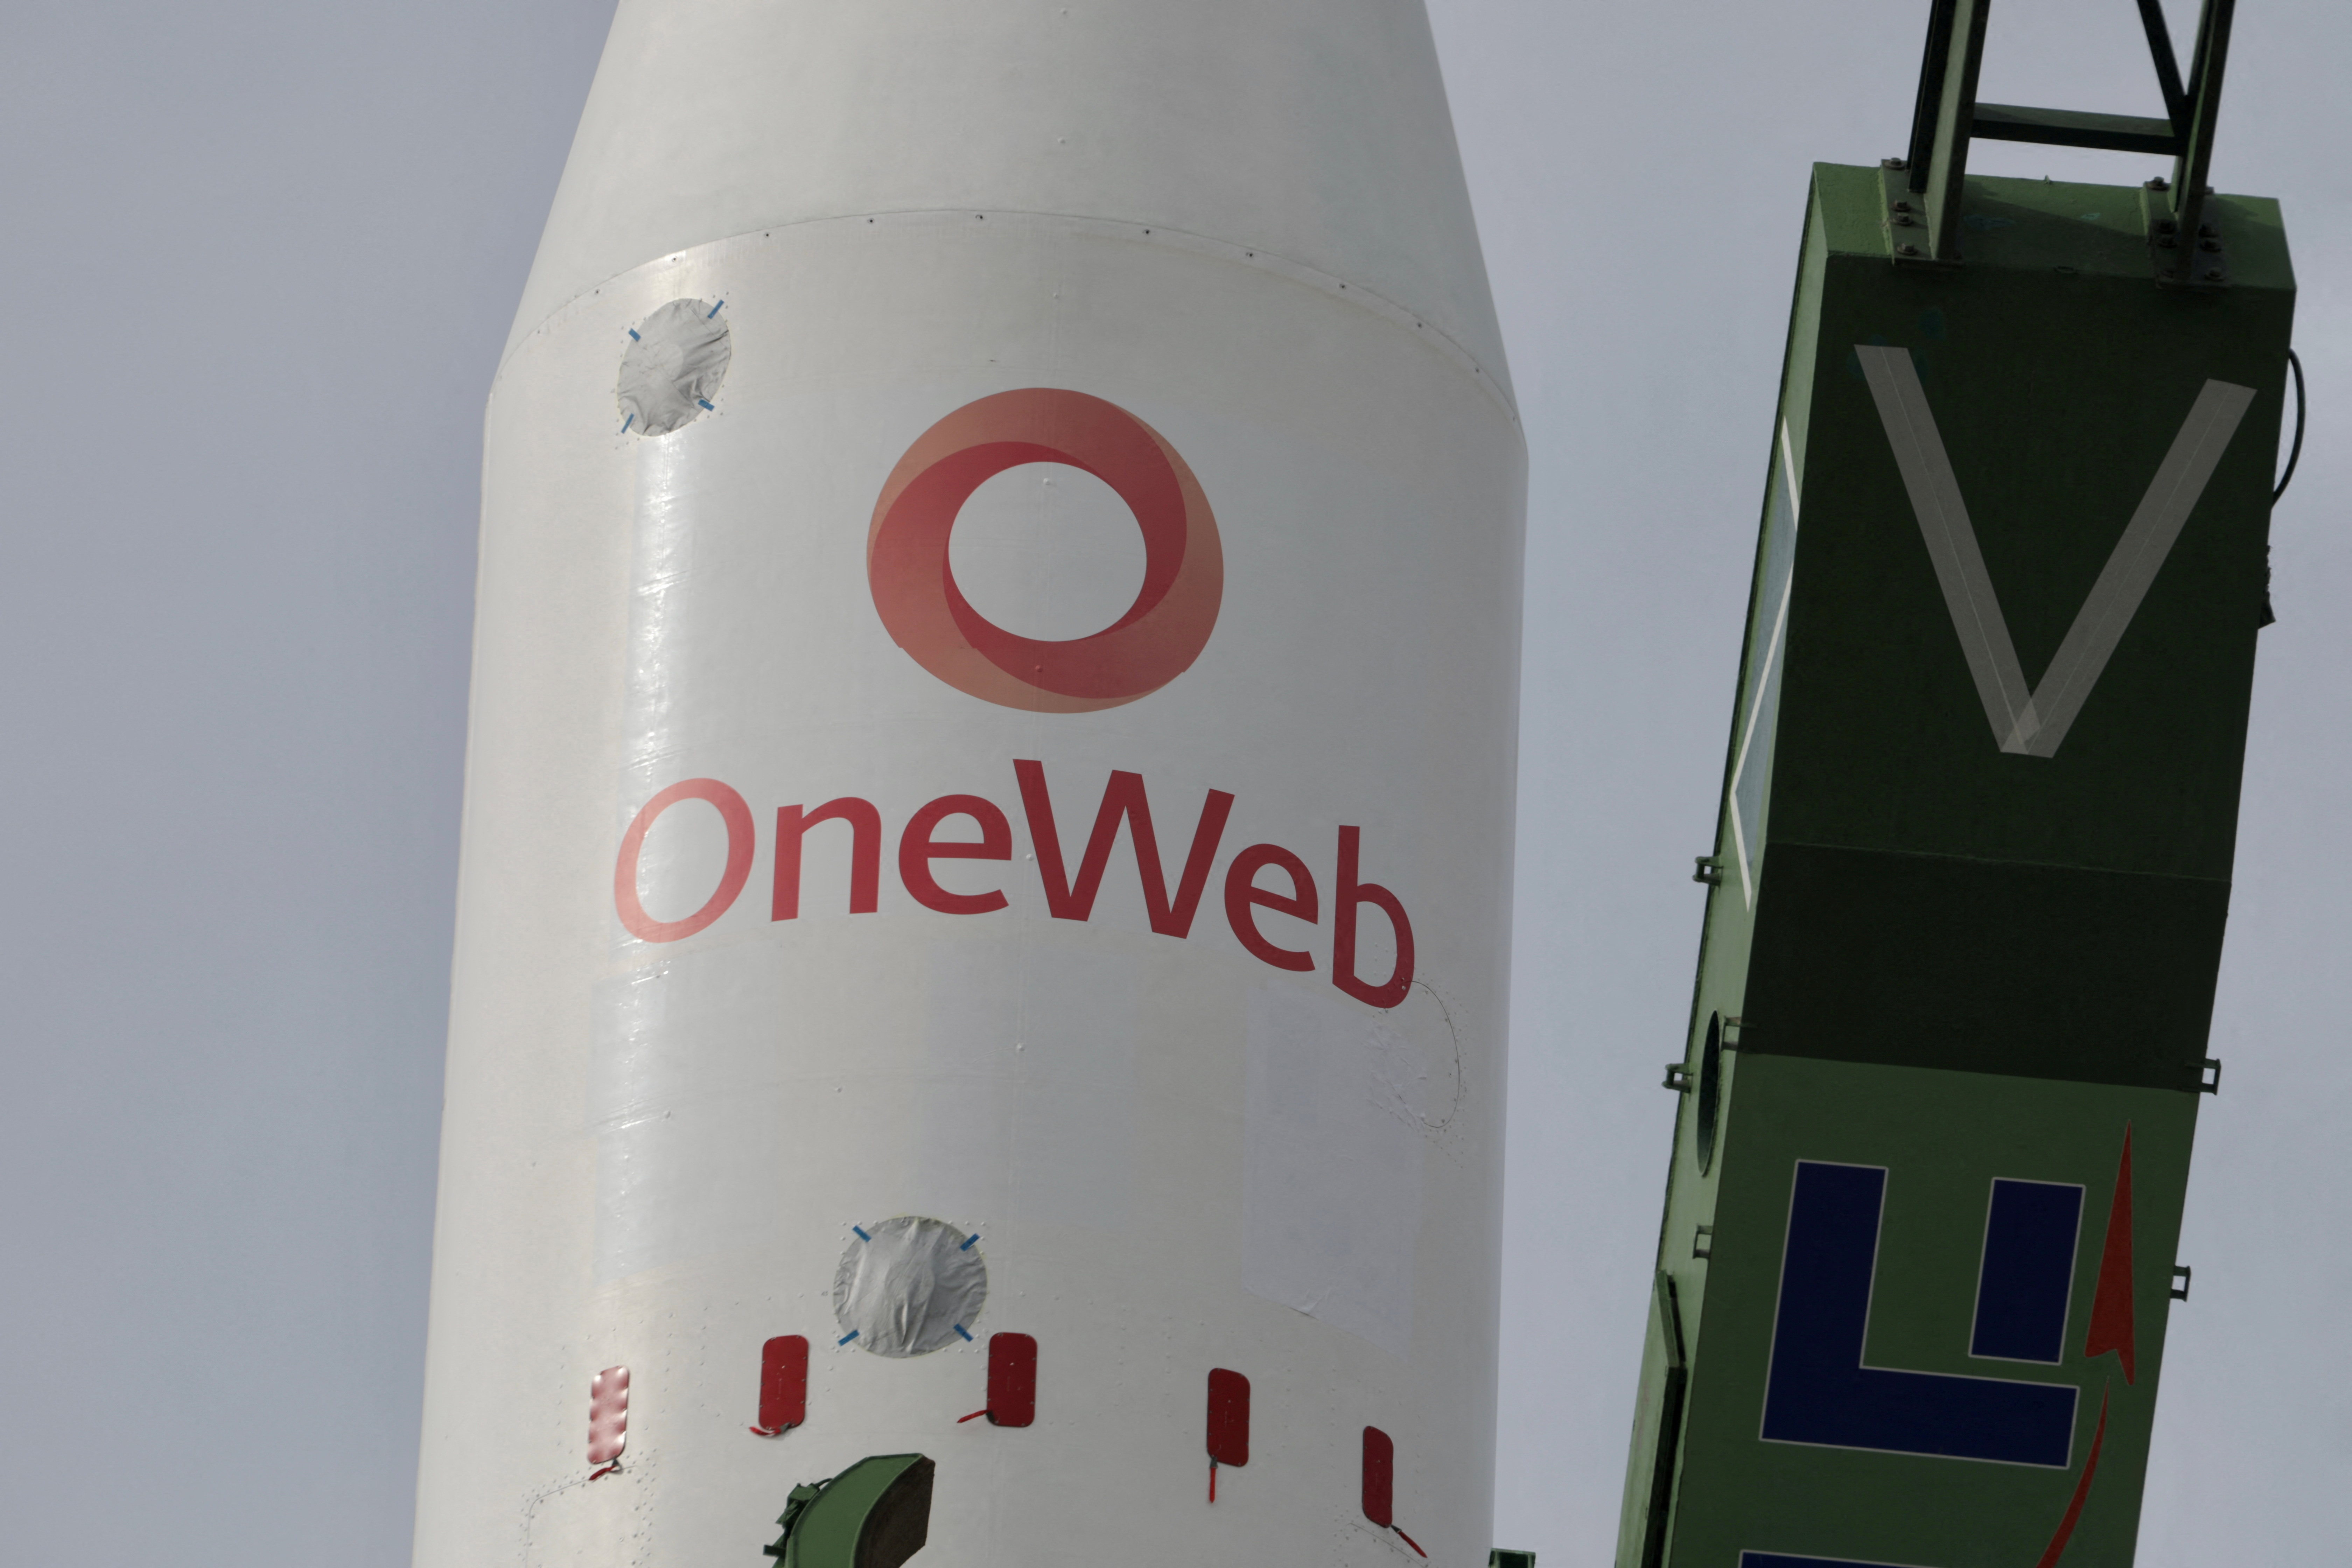 A Soyuz rocket with satellites of British firm OneWeb is removed from a launchpad at the Baikonur Cosmodrome